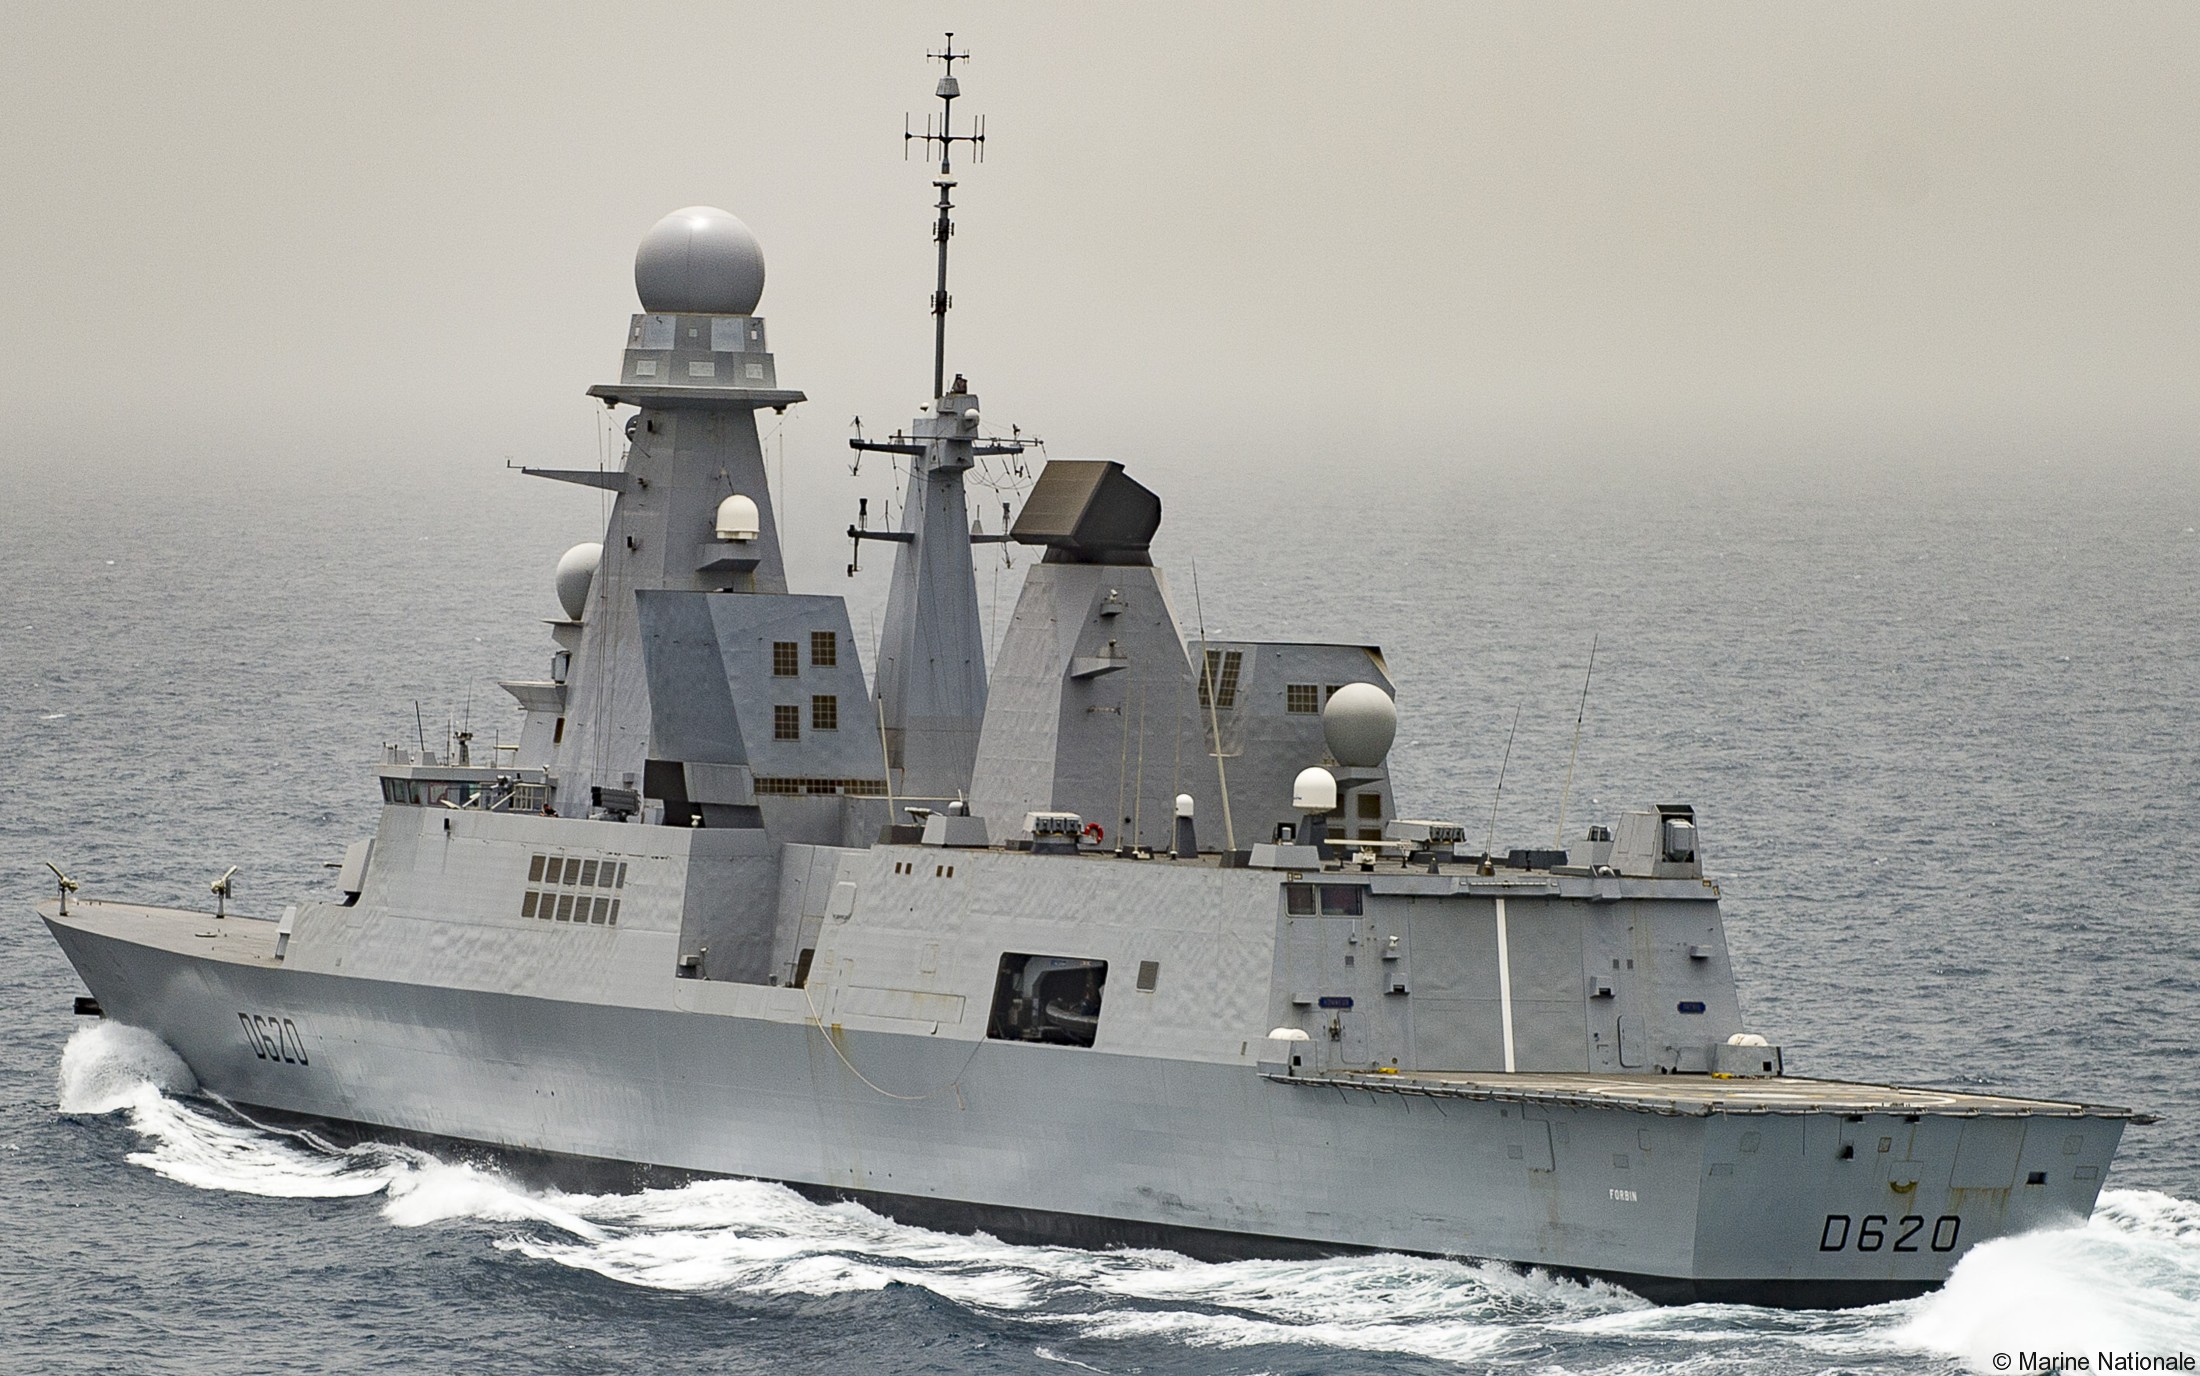 d-620 fs forbin horizon class guided missile frigate anti-air-warfare aaw ffgh french navy marine nationale 14